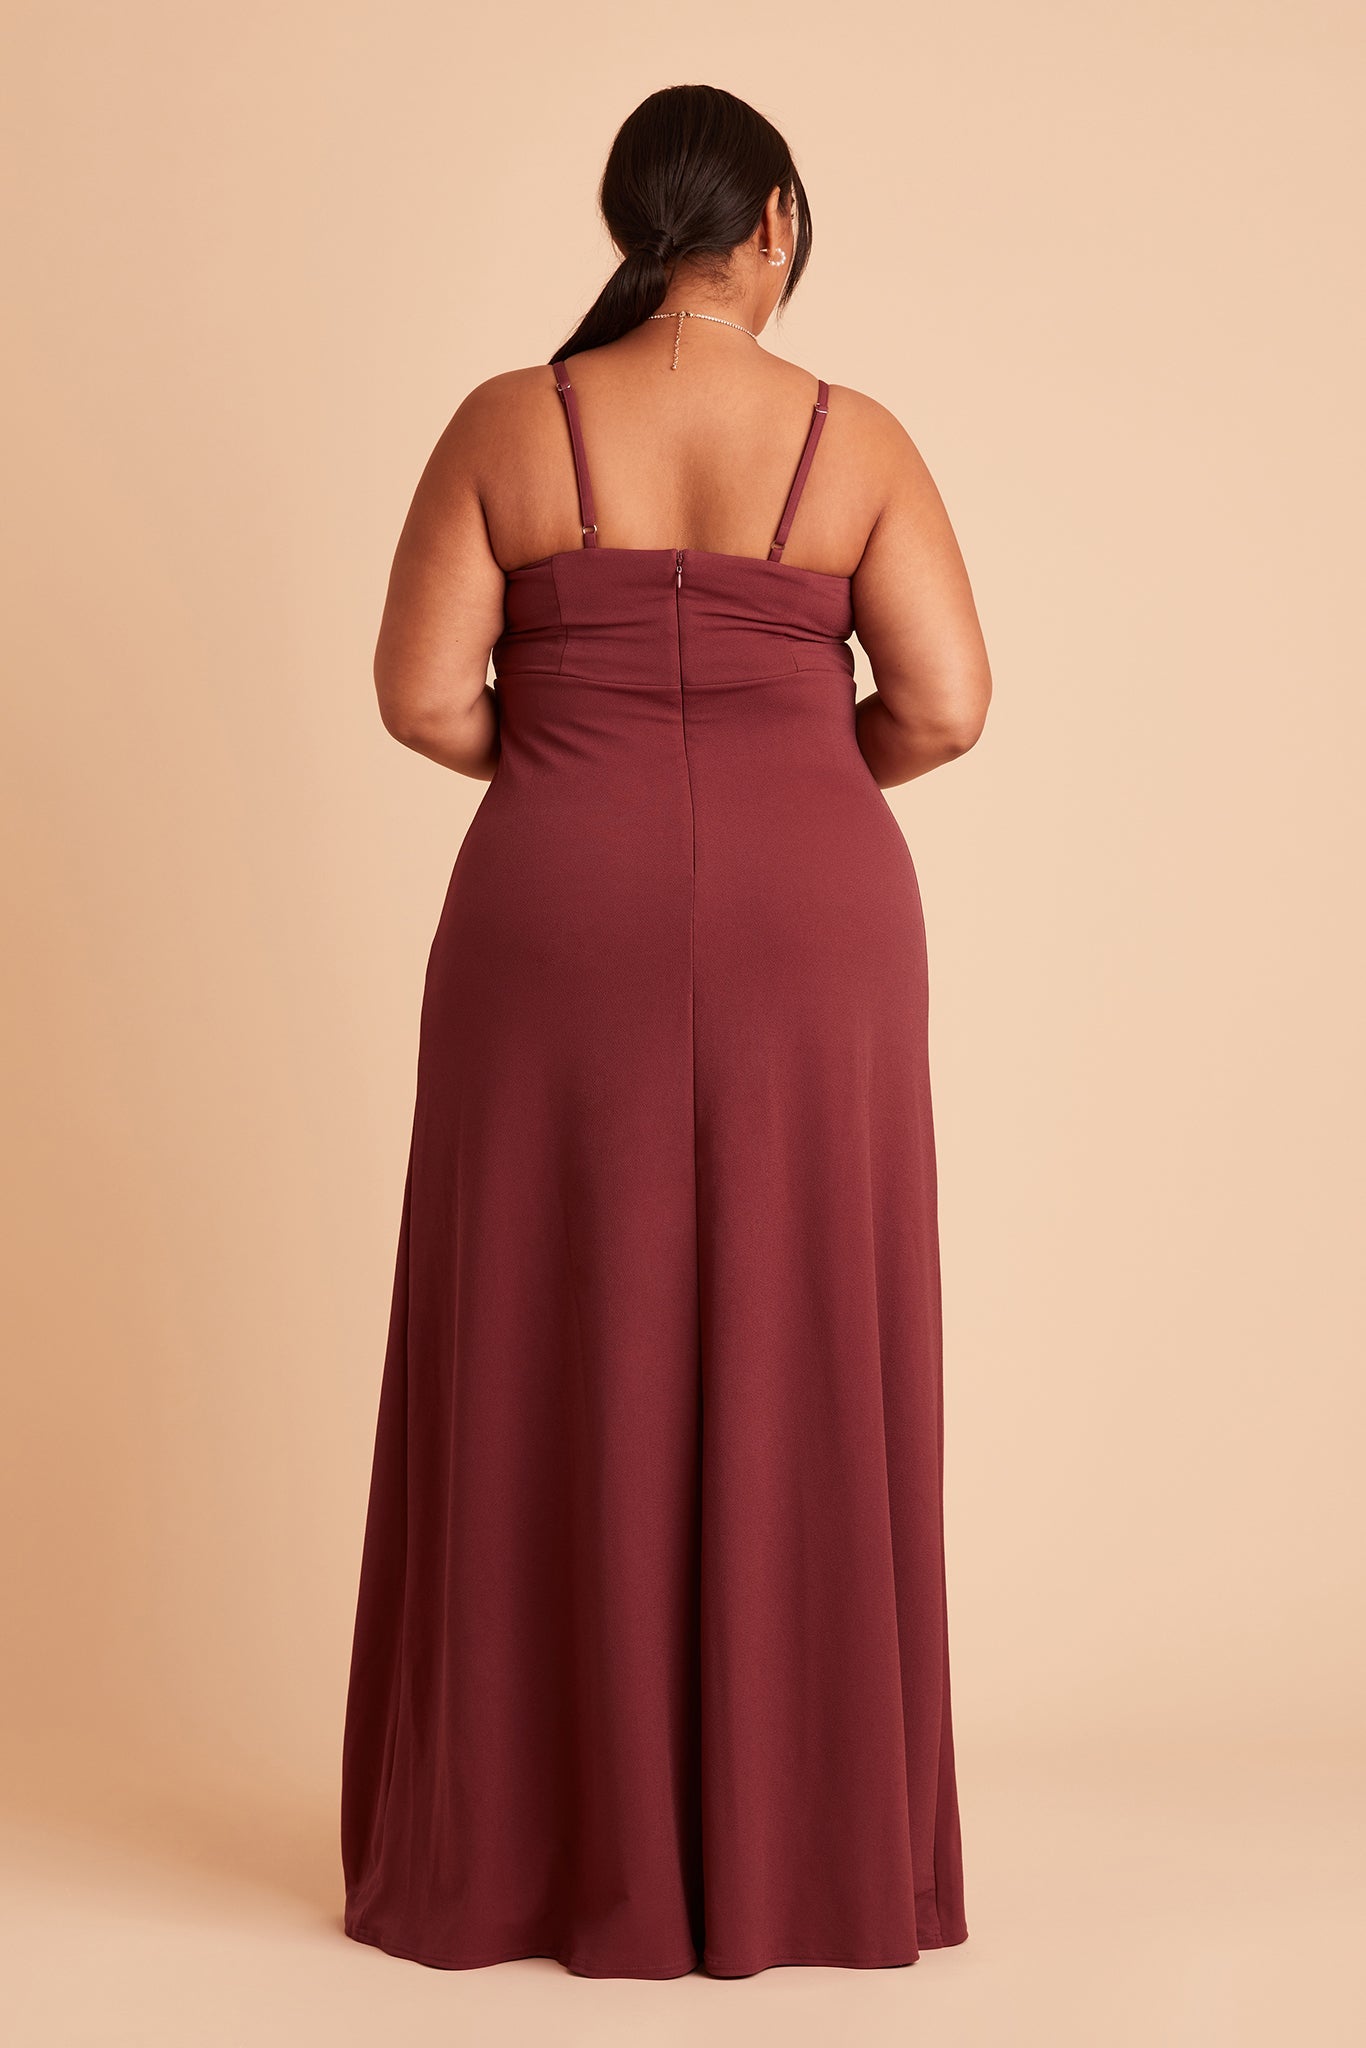 Ash plus size bridesmaid dress with slit in rosewood crepe by Birdy Grey, back view